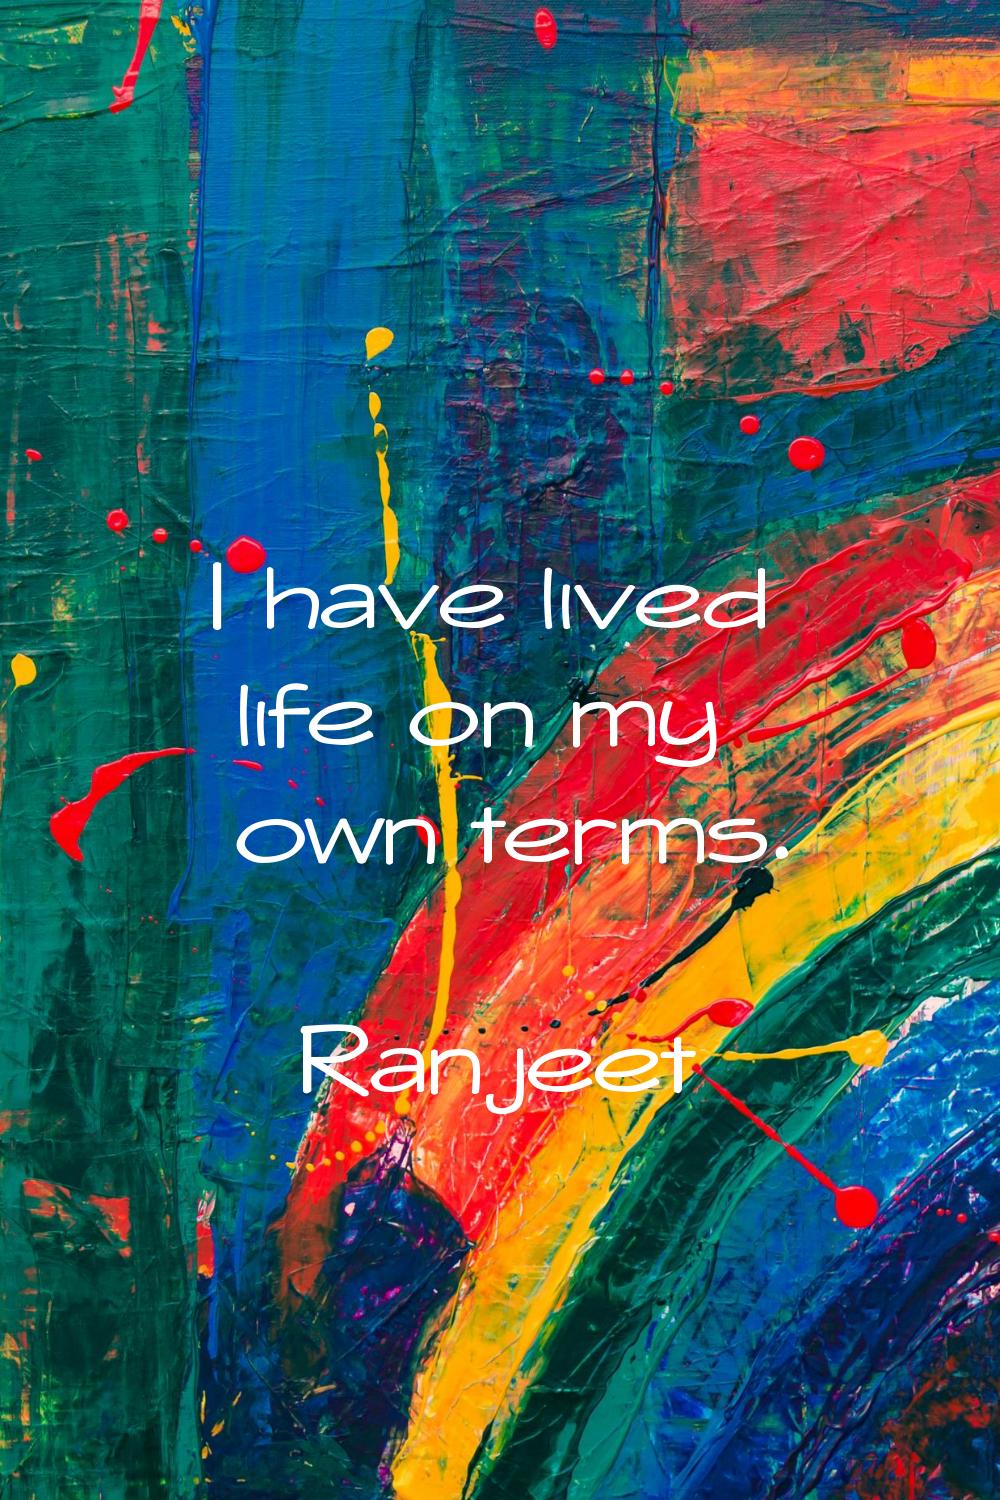 I have lived life on my own terms.